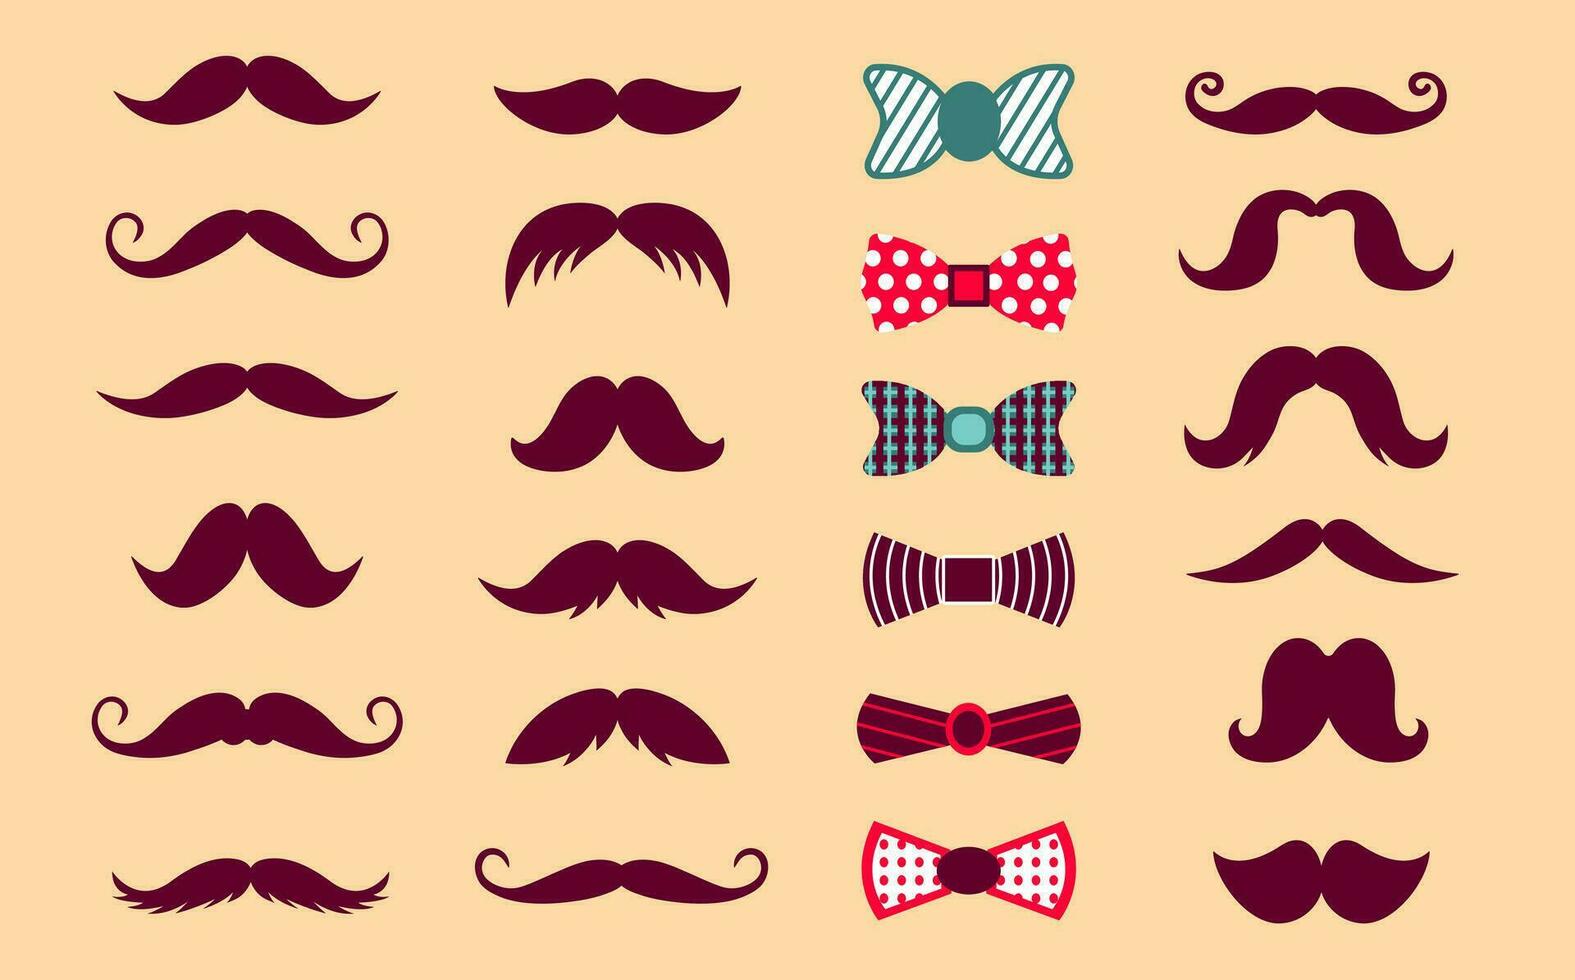 Set with various mustaches and bows. Cute collection of icons in flat style. Vector illustration with separate textures on items.